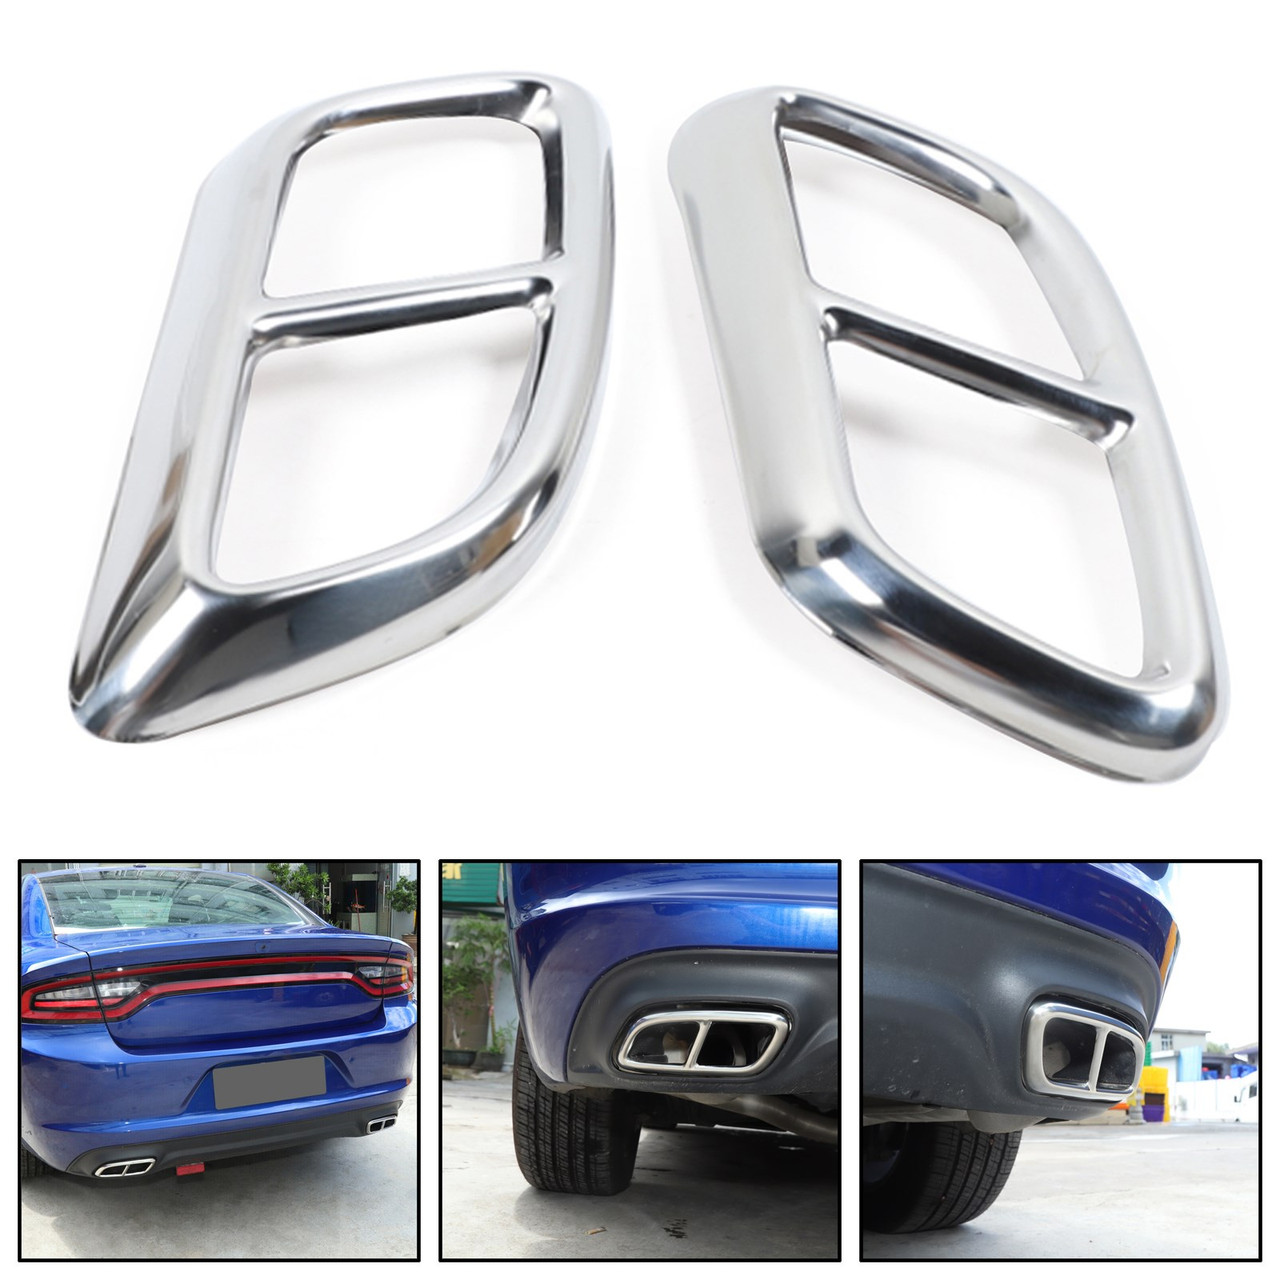 2PCS Stainless Rear Exhaust Tail Muffler Decor Cover Trim Fits For Charger 2015+ Silver